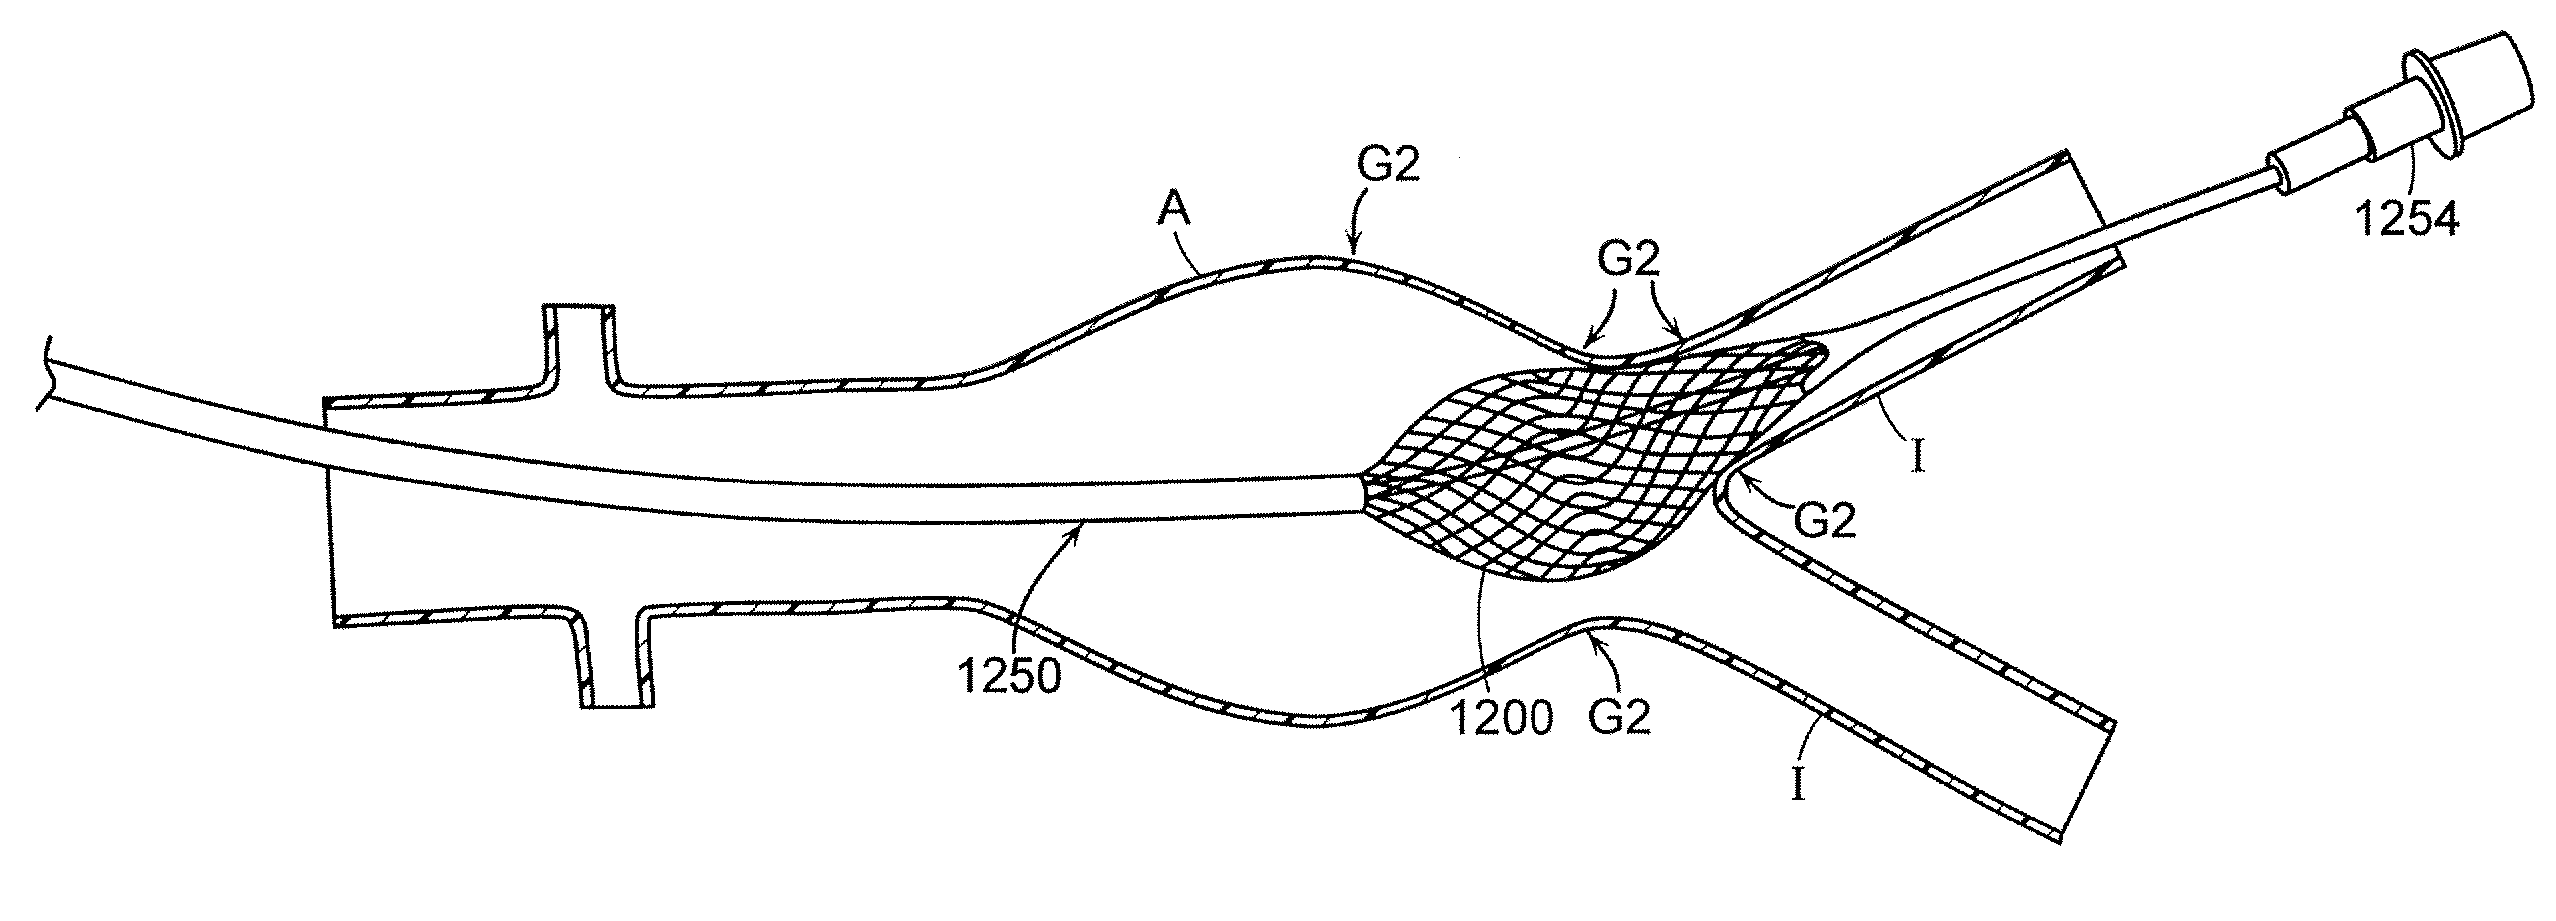 Non-occluding dilation device